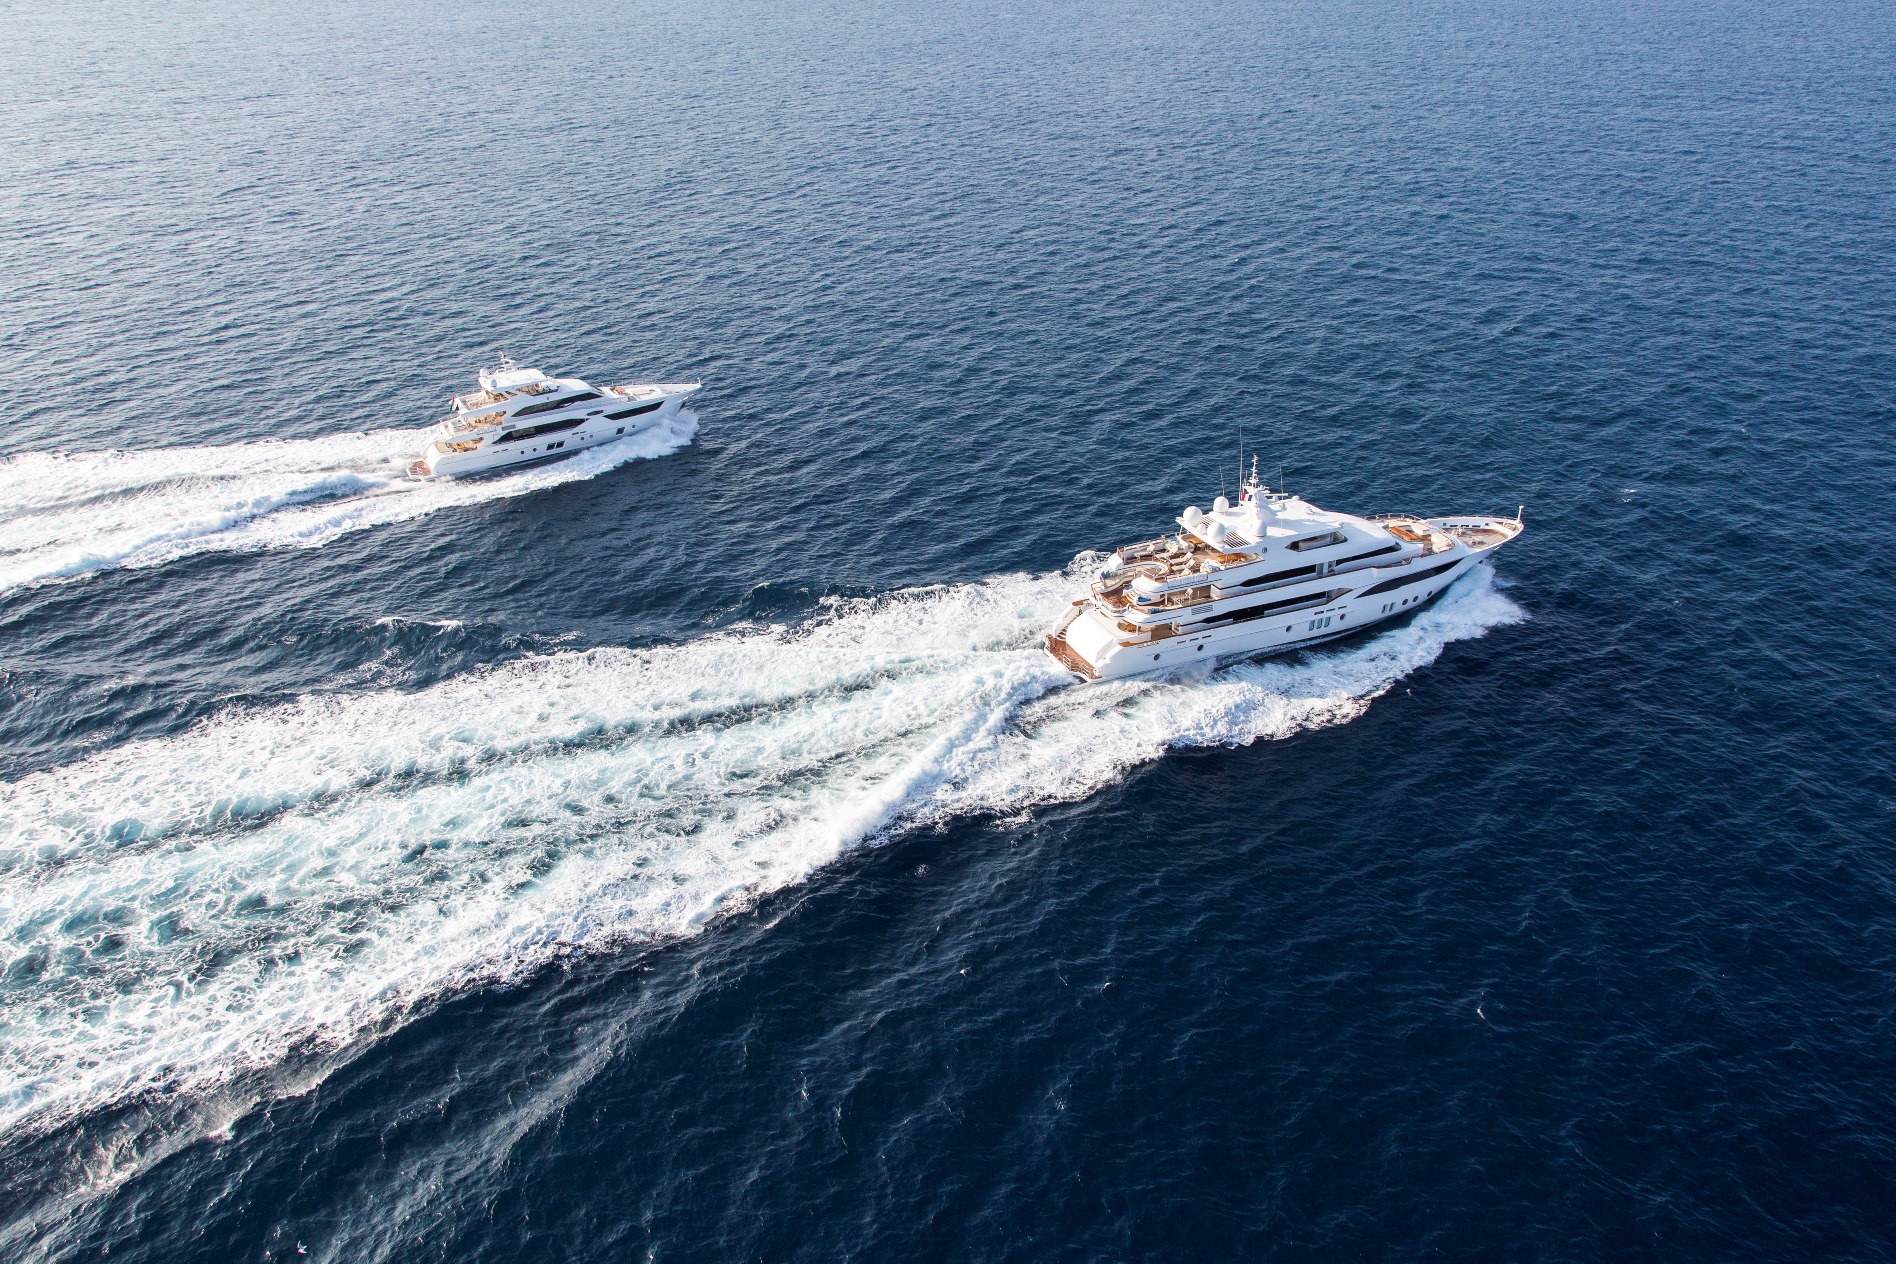 Majesty 155 and Majesty 110 in Cannes, France 003.jpg